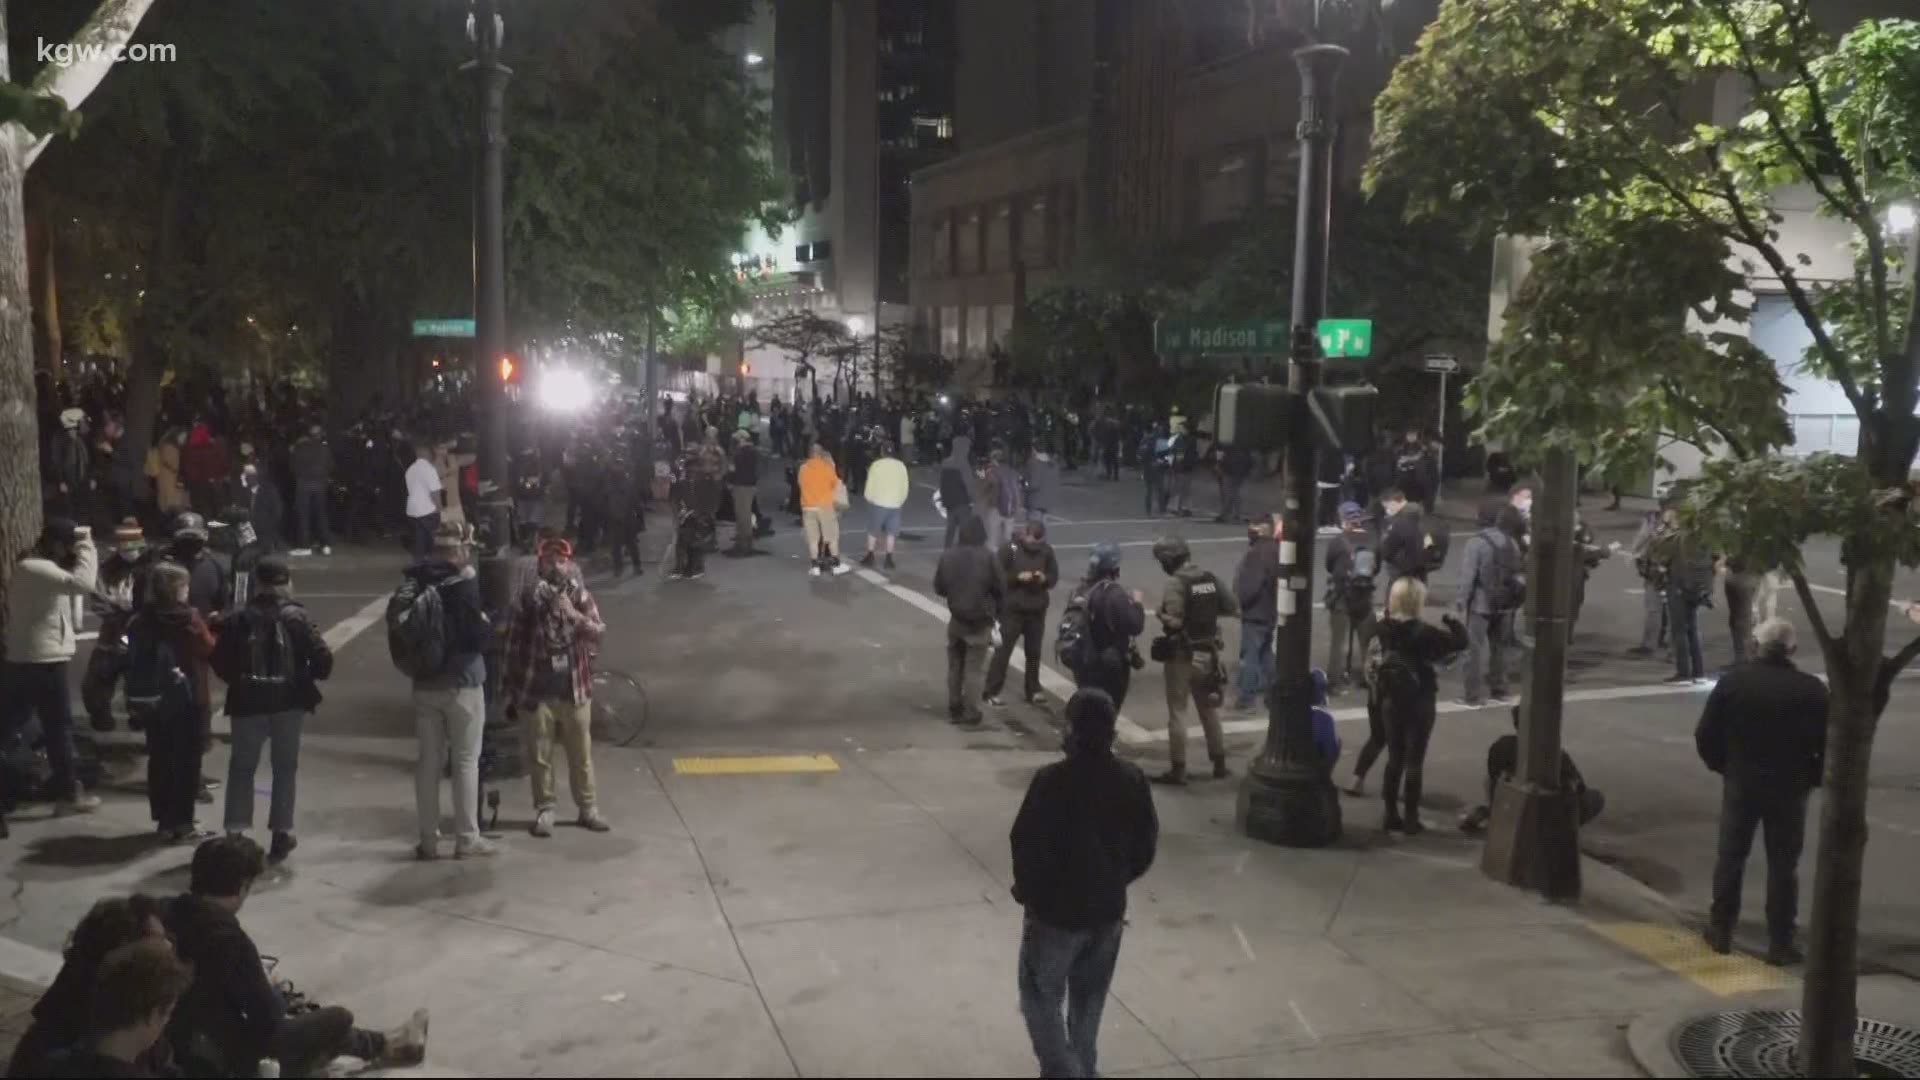 The protests continue in Portland outside the Multnomah County Justice Center. It is the 112th night of protesting the city has seen.